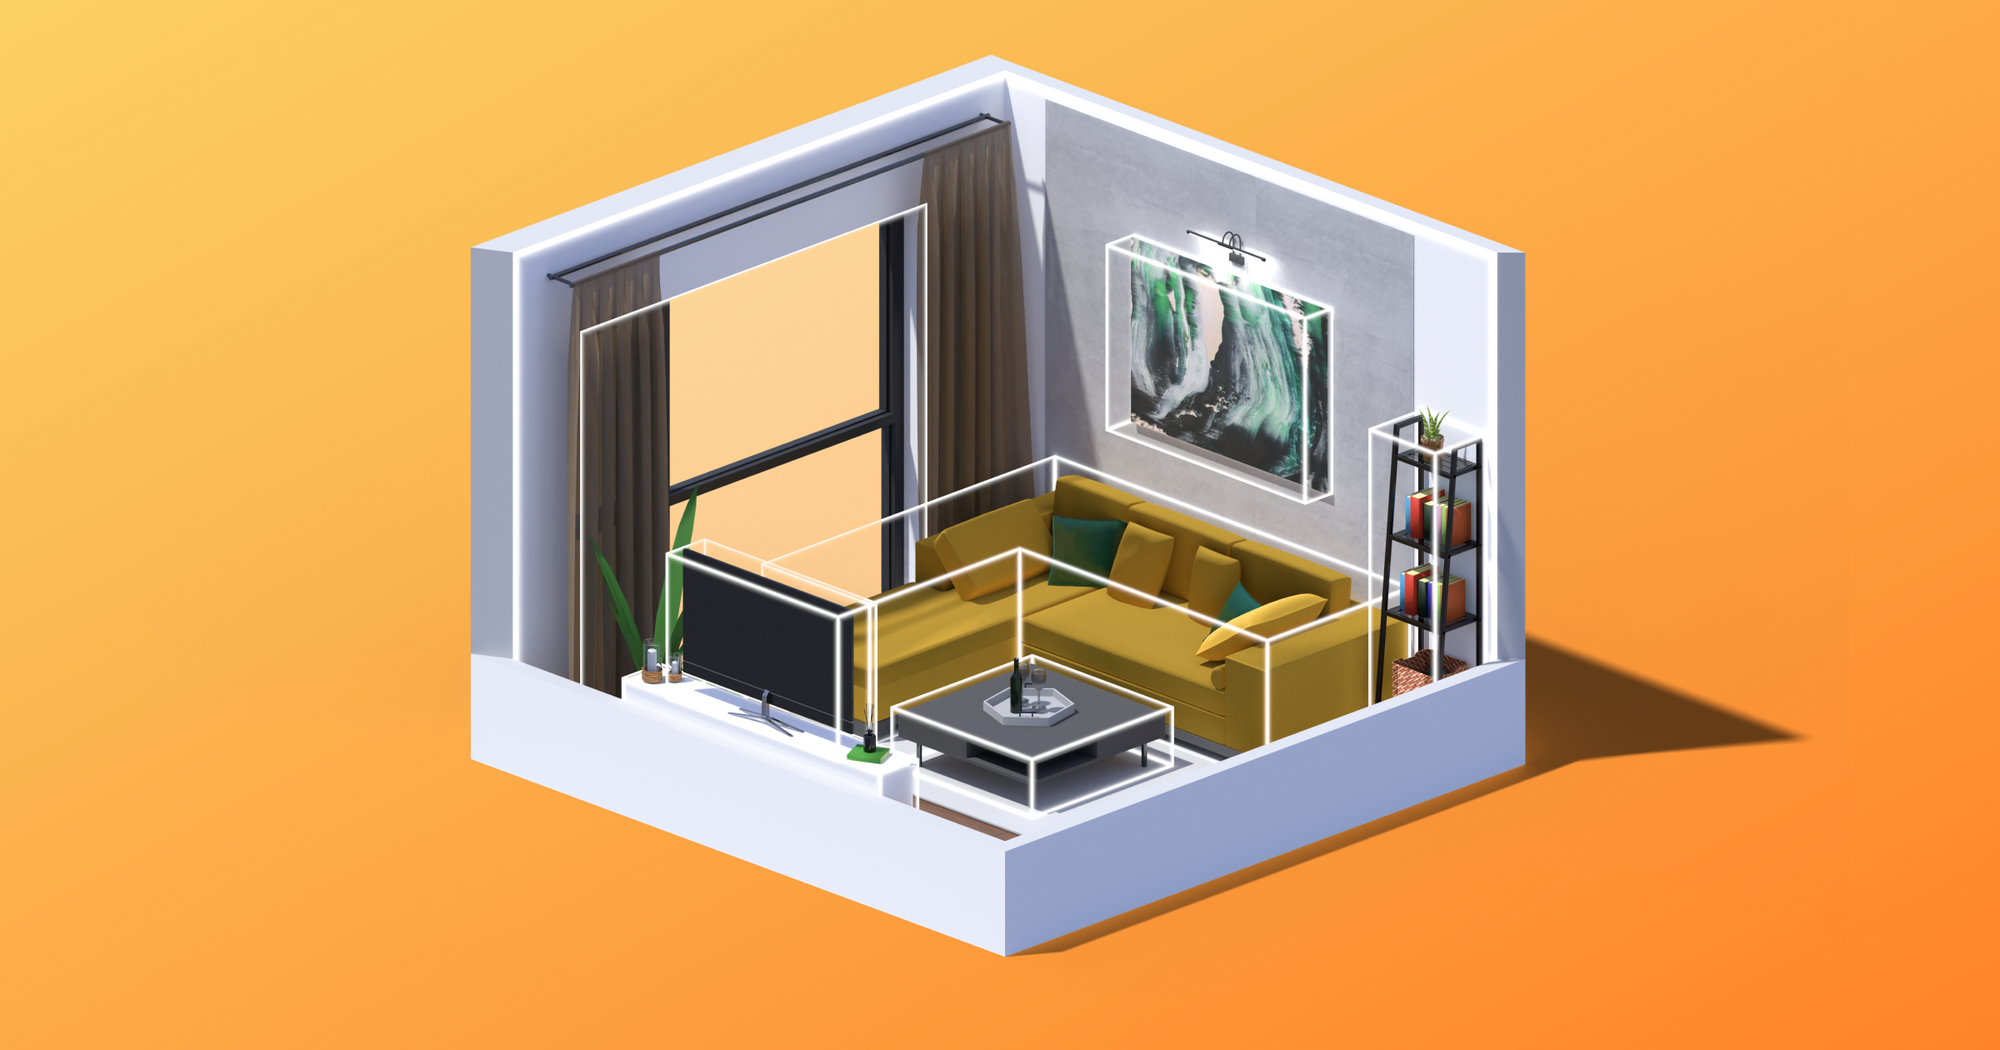 Download Room Planner: Home Interior 3D APK for Android, Run on PC and Mac